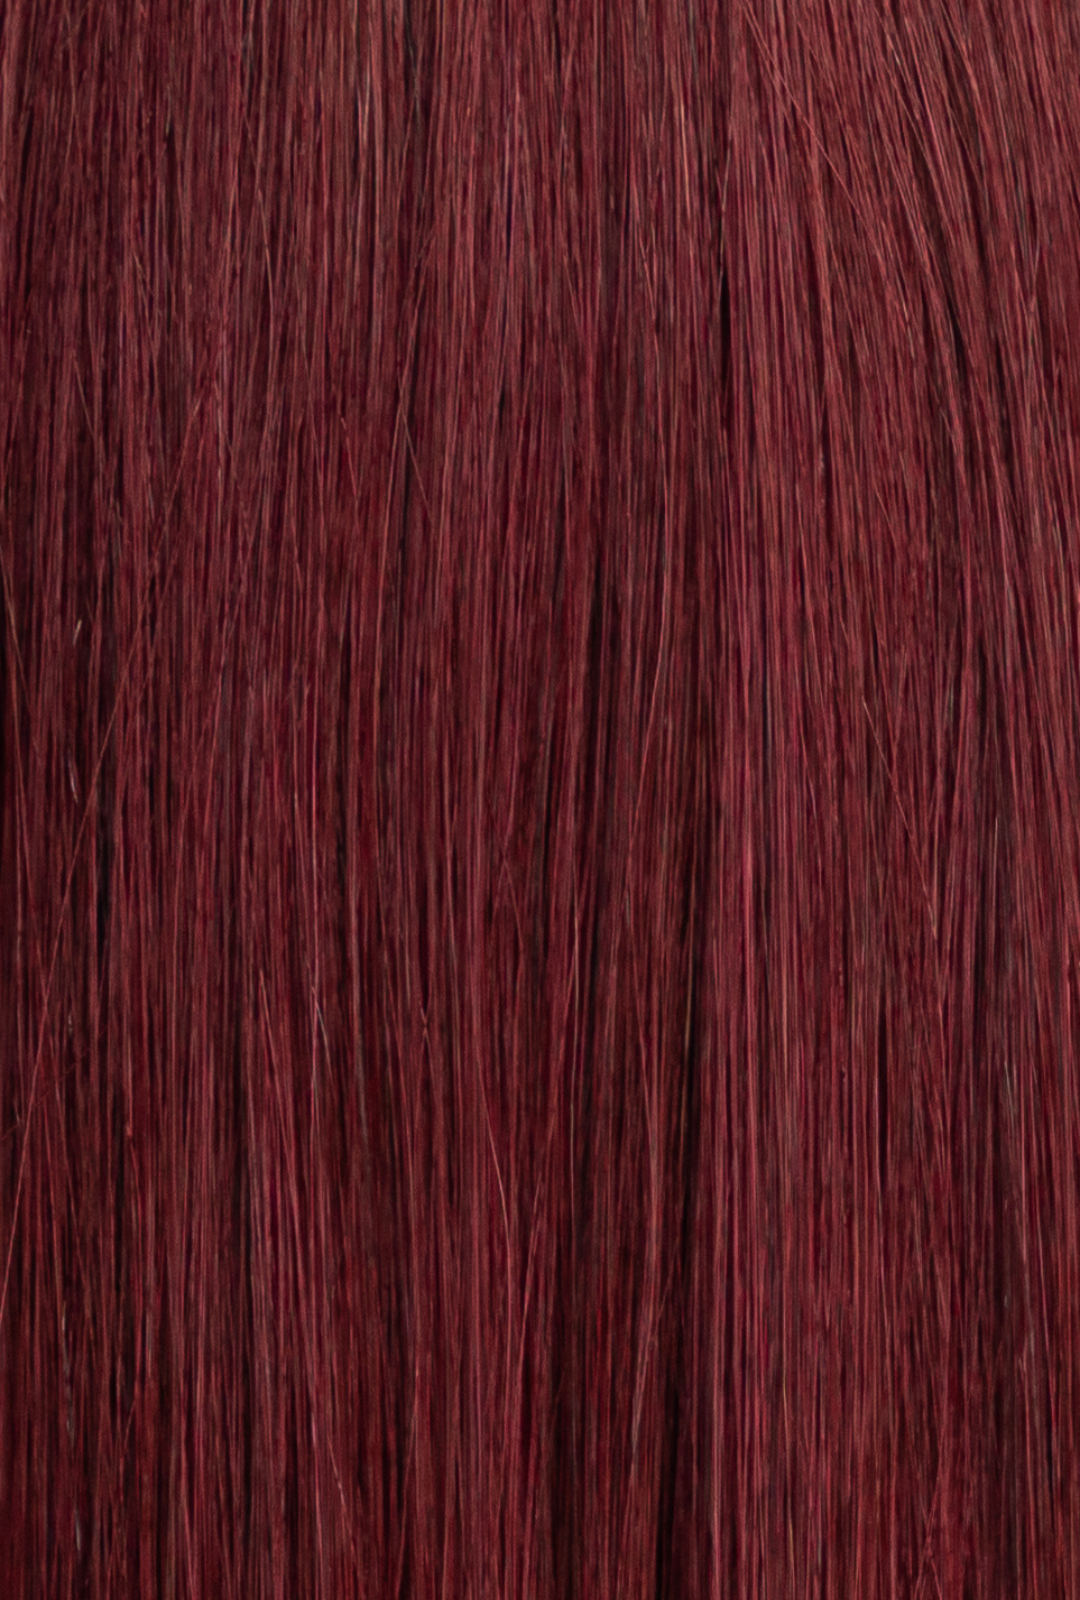 Laced Hair Keratin Bond Extensions #99J (Red Red Wine)